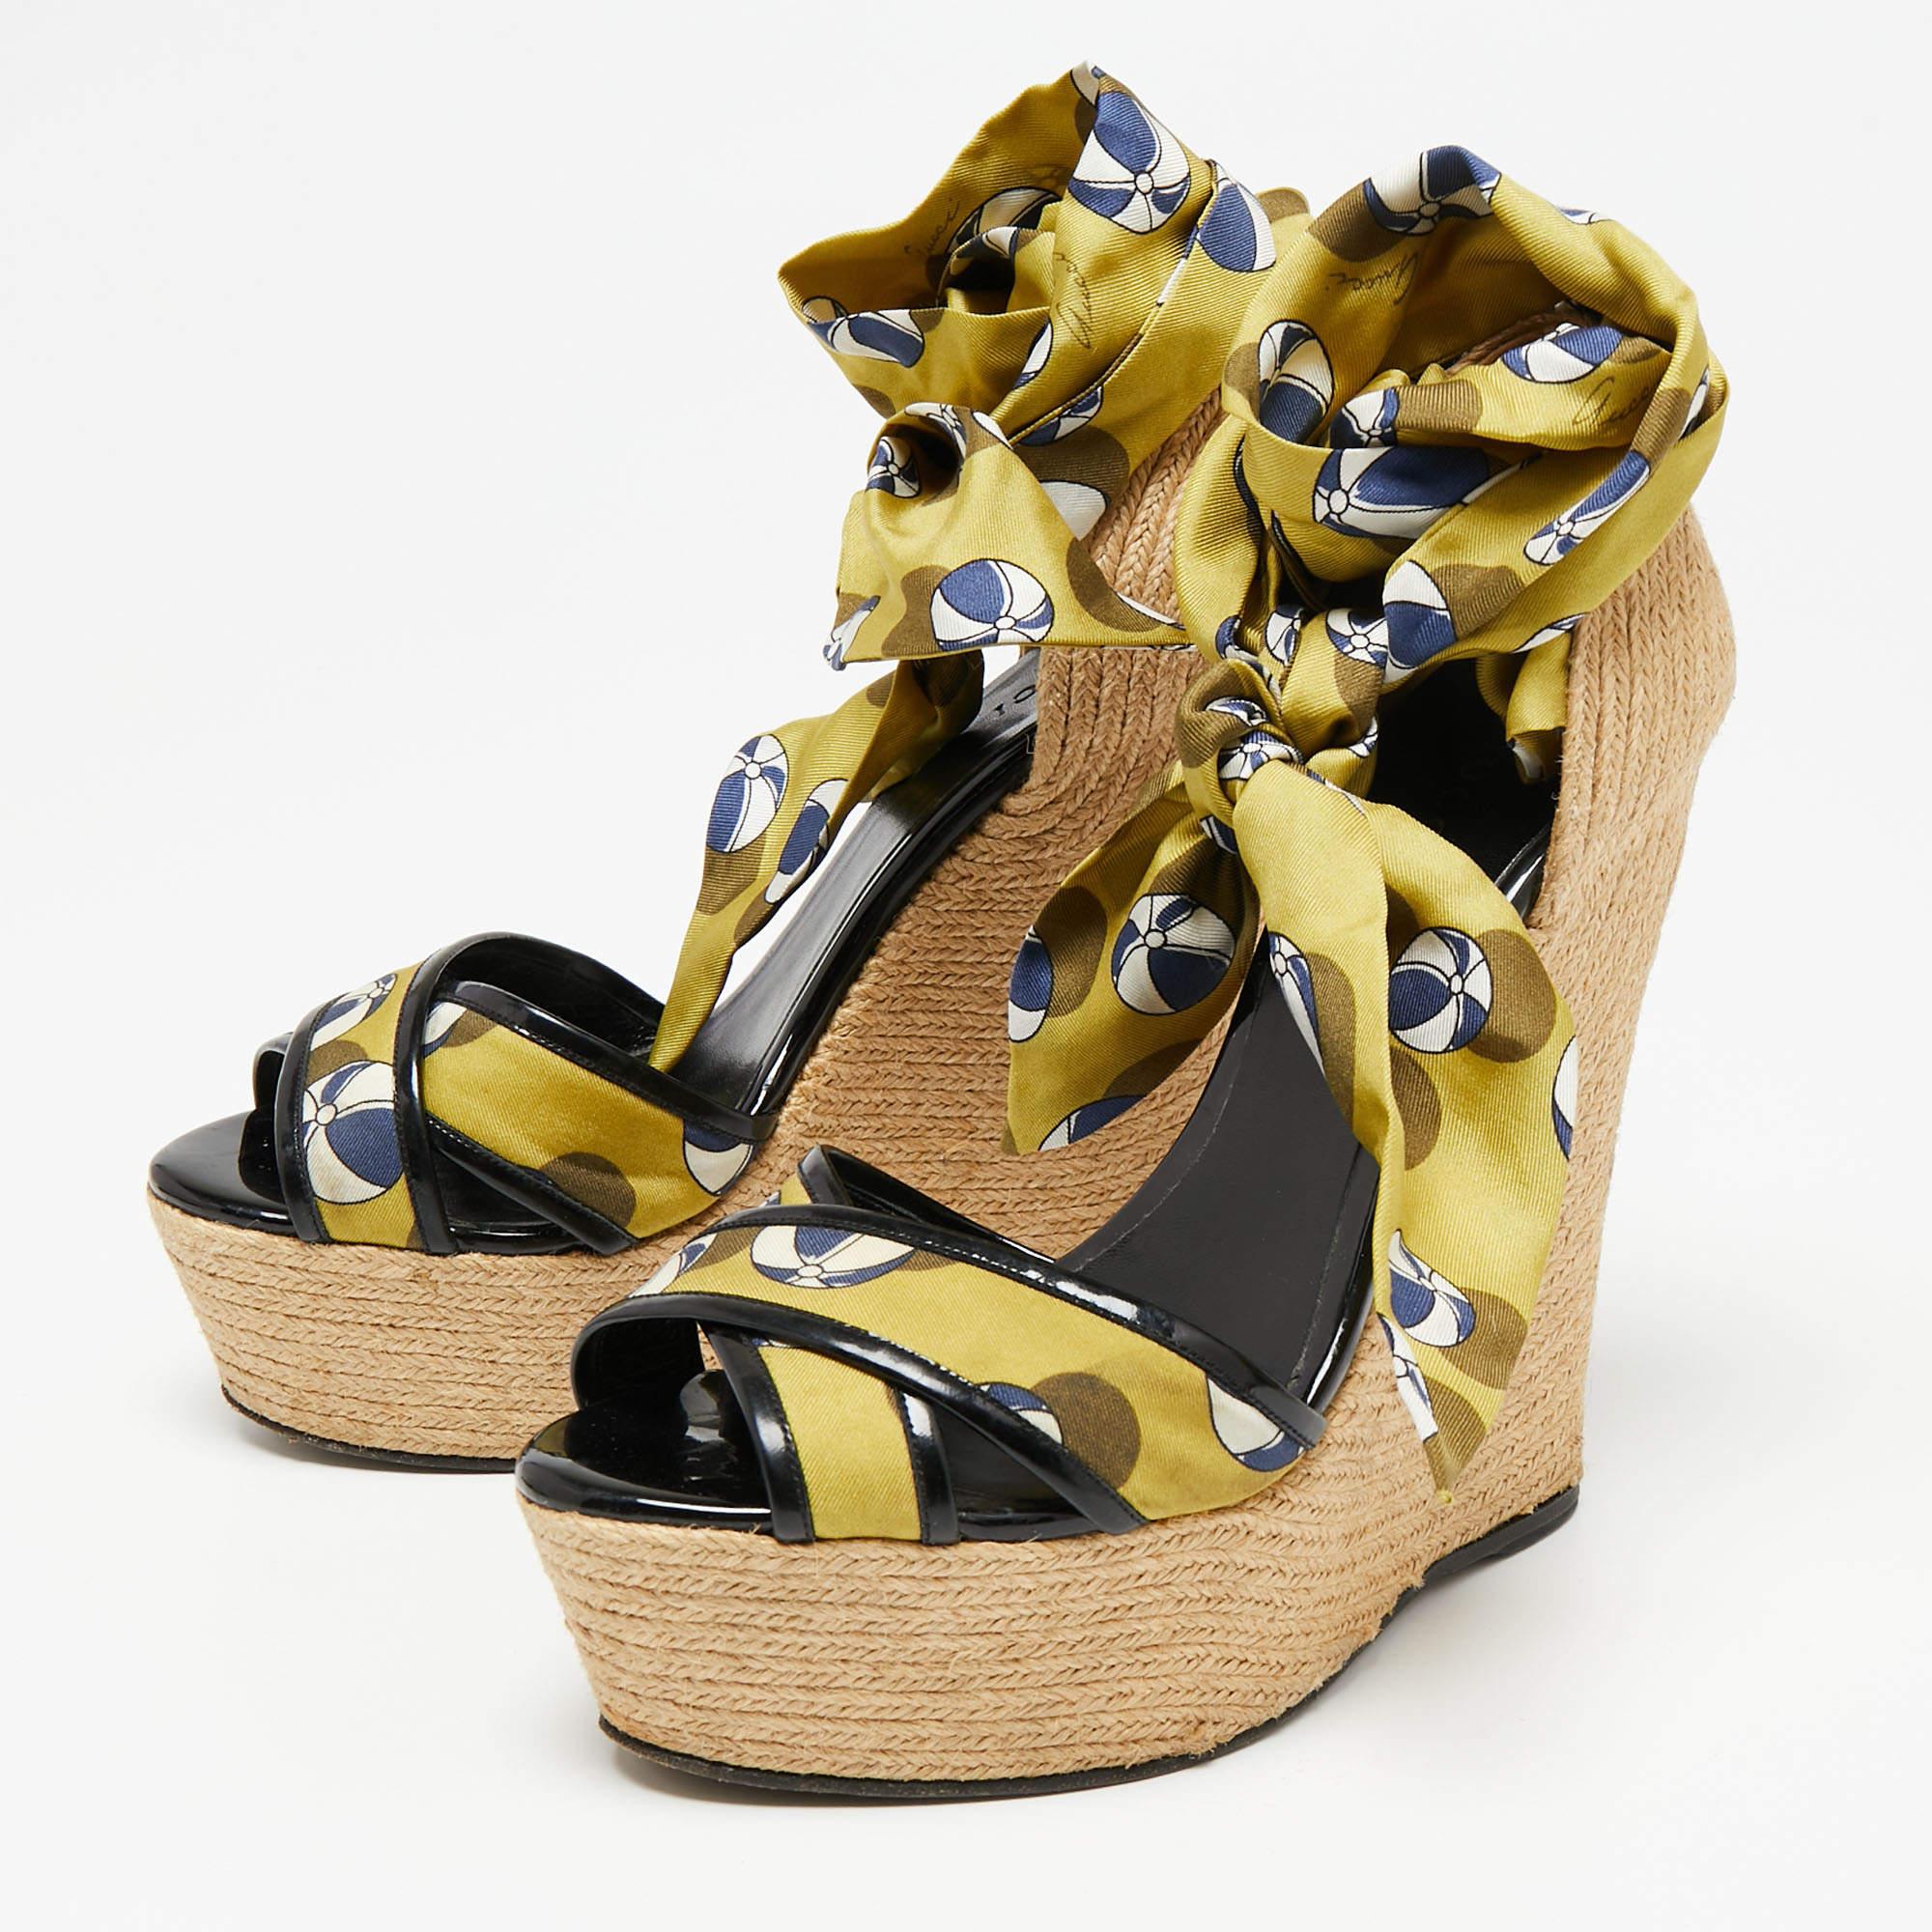 Gucci Multicolor Printed Silk and Jute Scarf Ankle Wrap Wedge Sandals Size 39 In Fair Condition For Sale In Dubai, Al Qouz 2